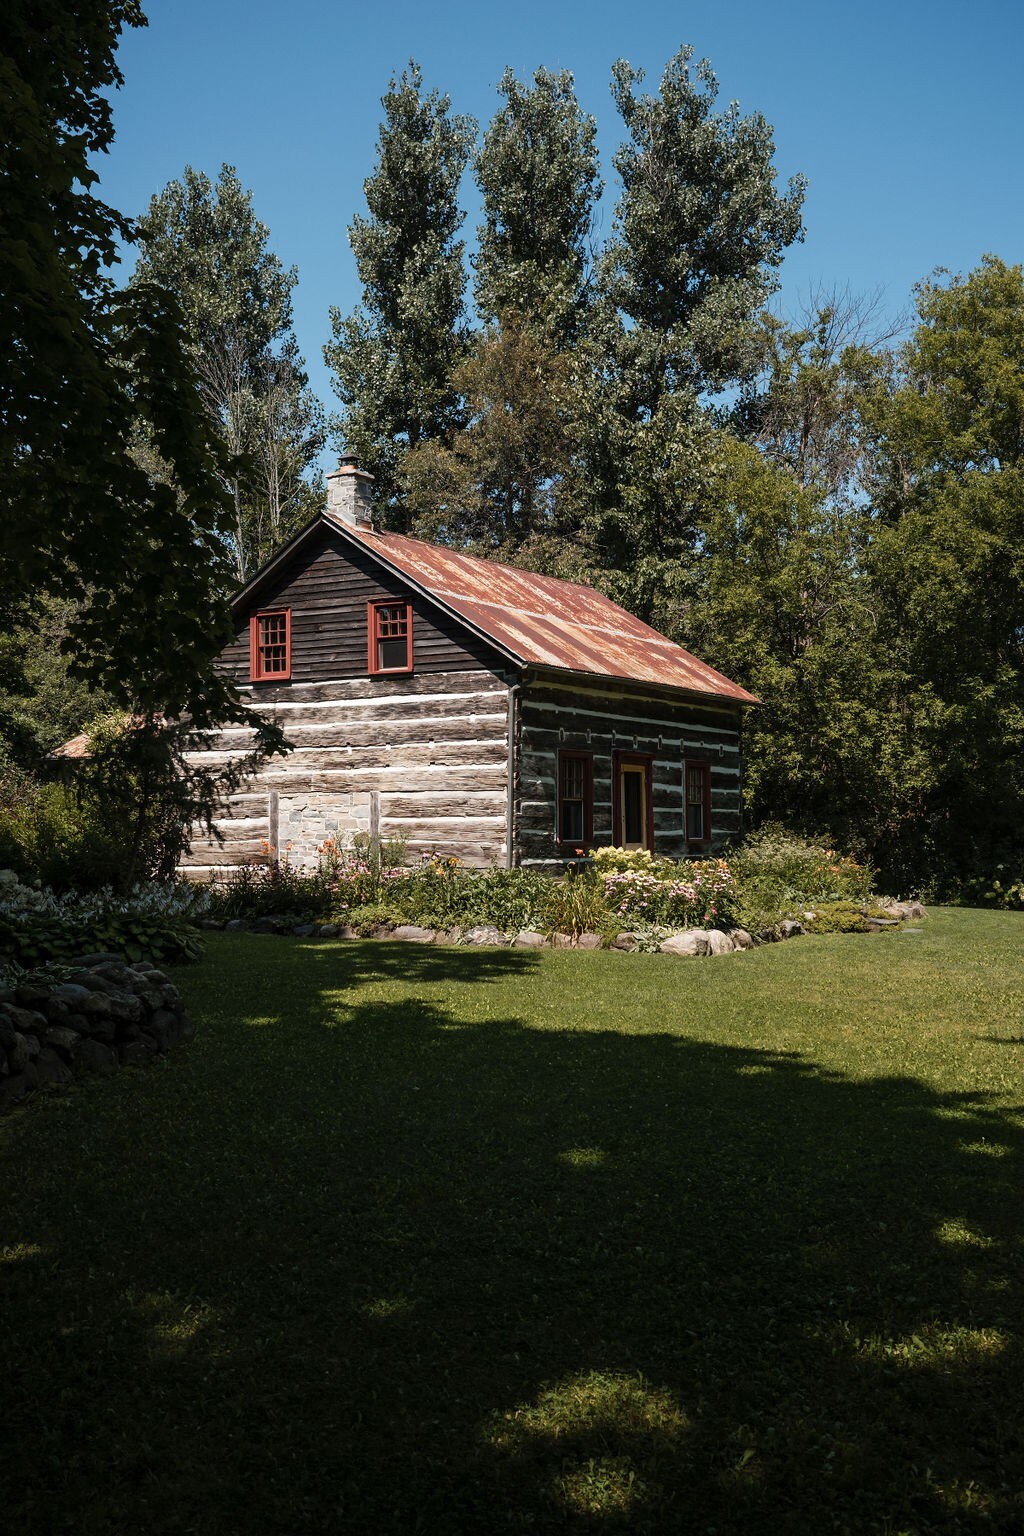 Log Cabin with gardens on the Salmon River